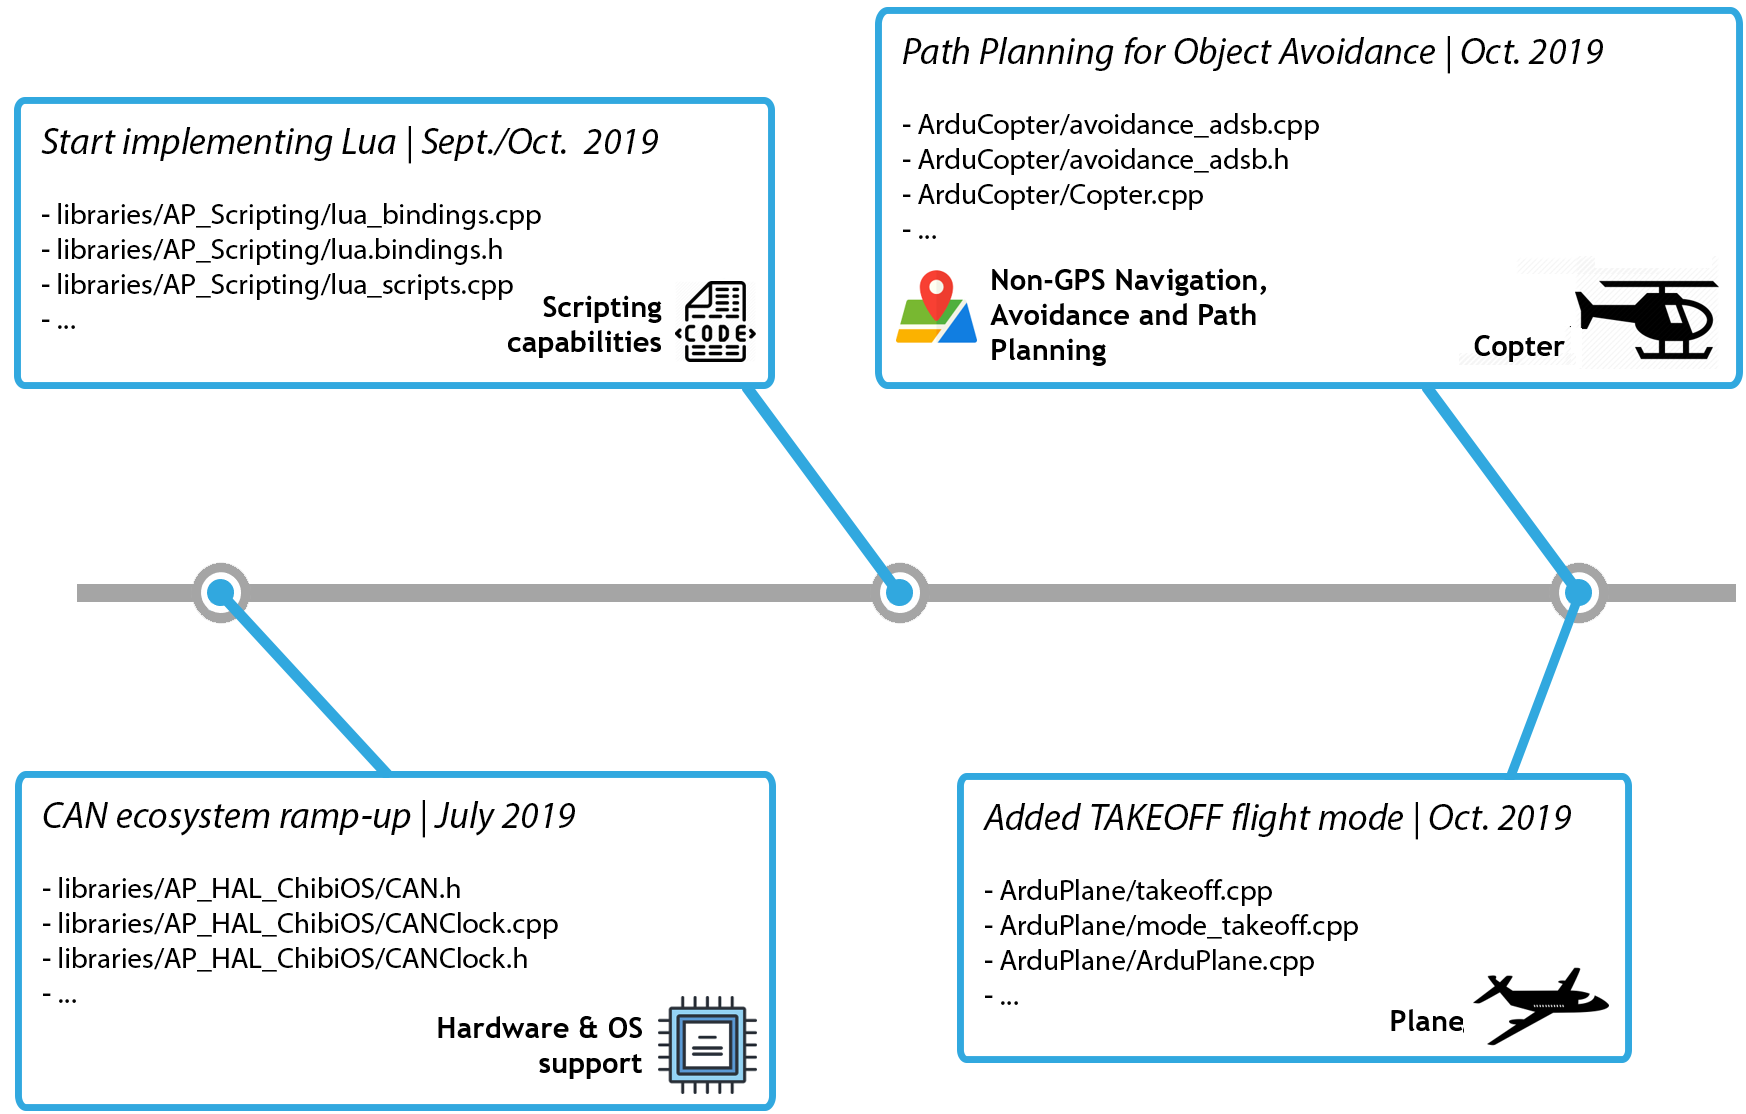 Mapping the roadmap onto actual files